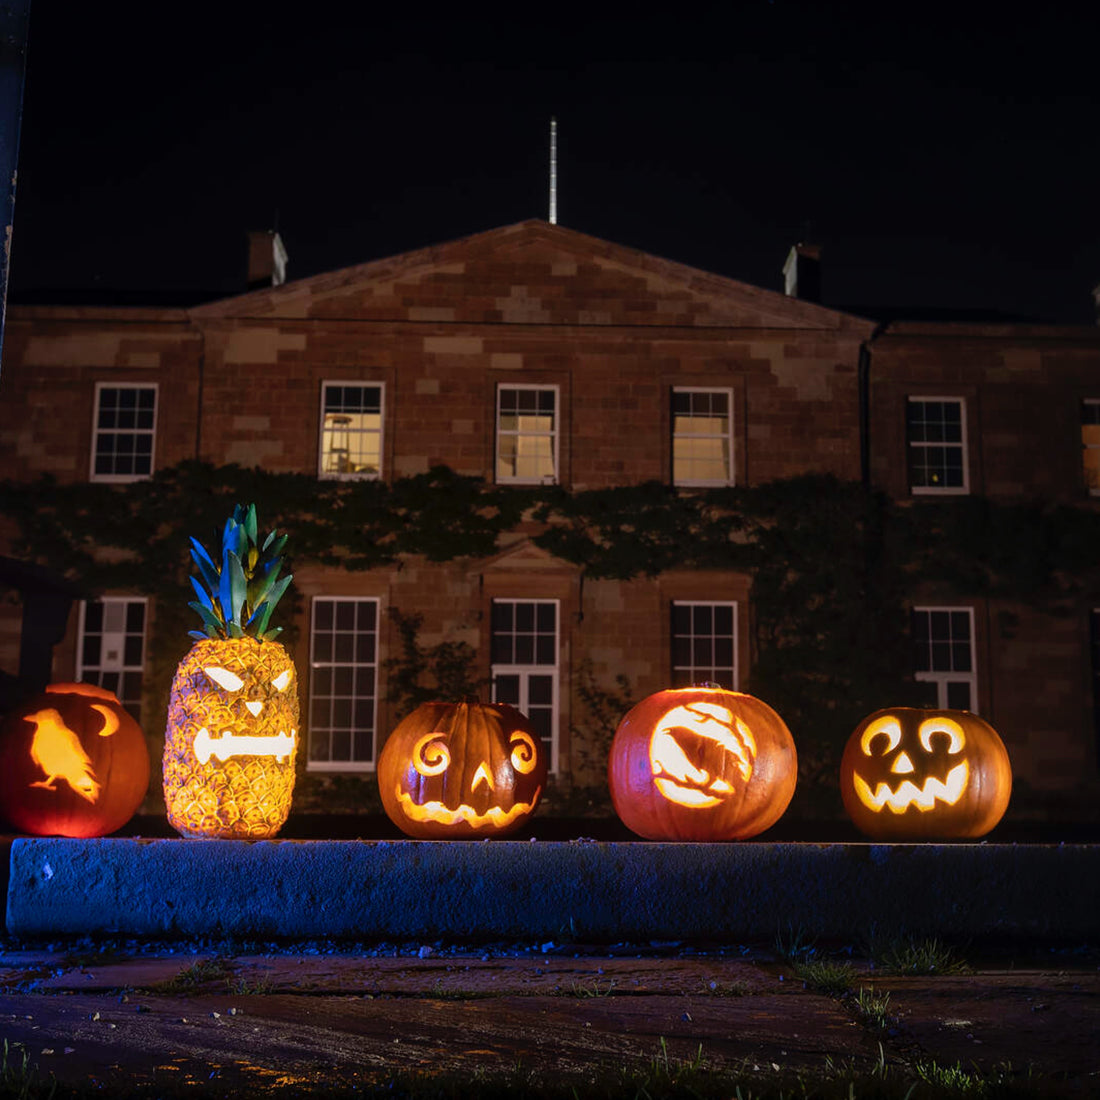 Embrace the giant spirits of Halloween in Northern Ireland